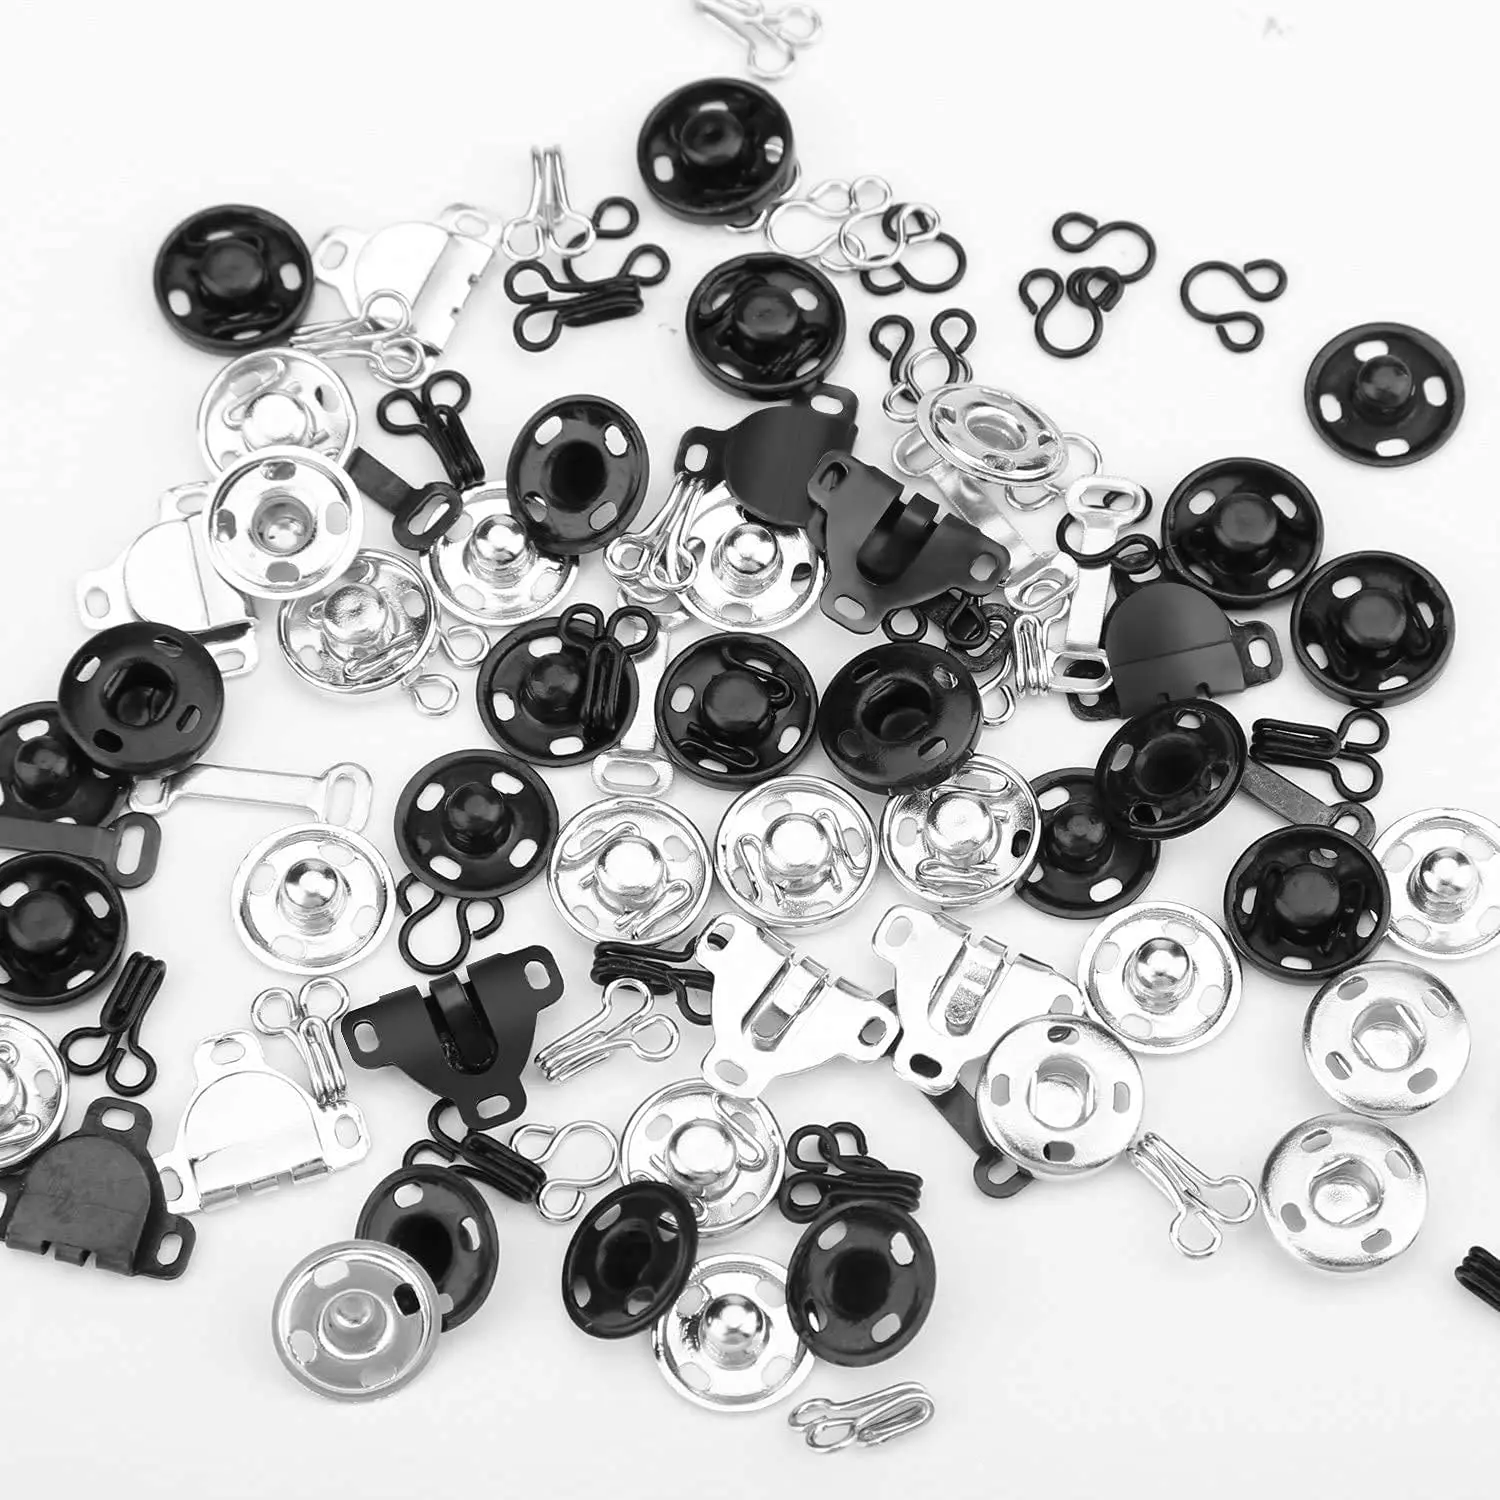 100 Metal Fastener Snap Button Hooks and Eyes Sewing Closures Set